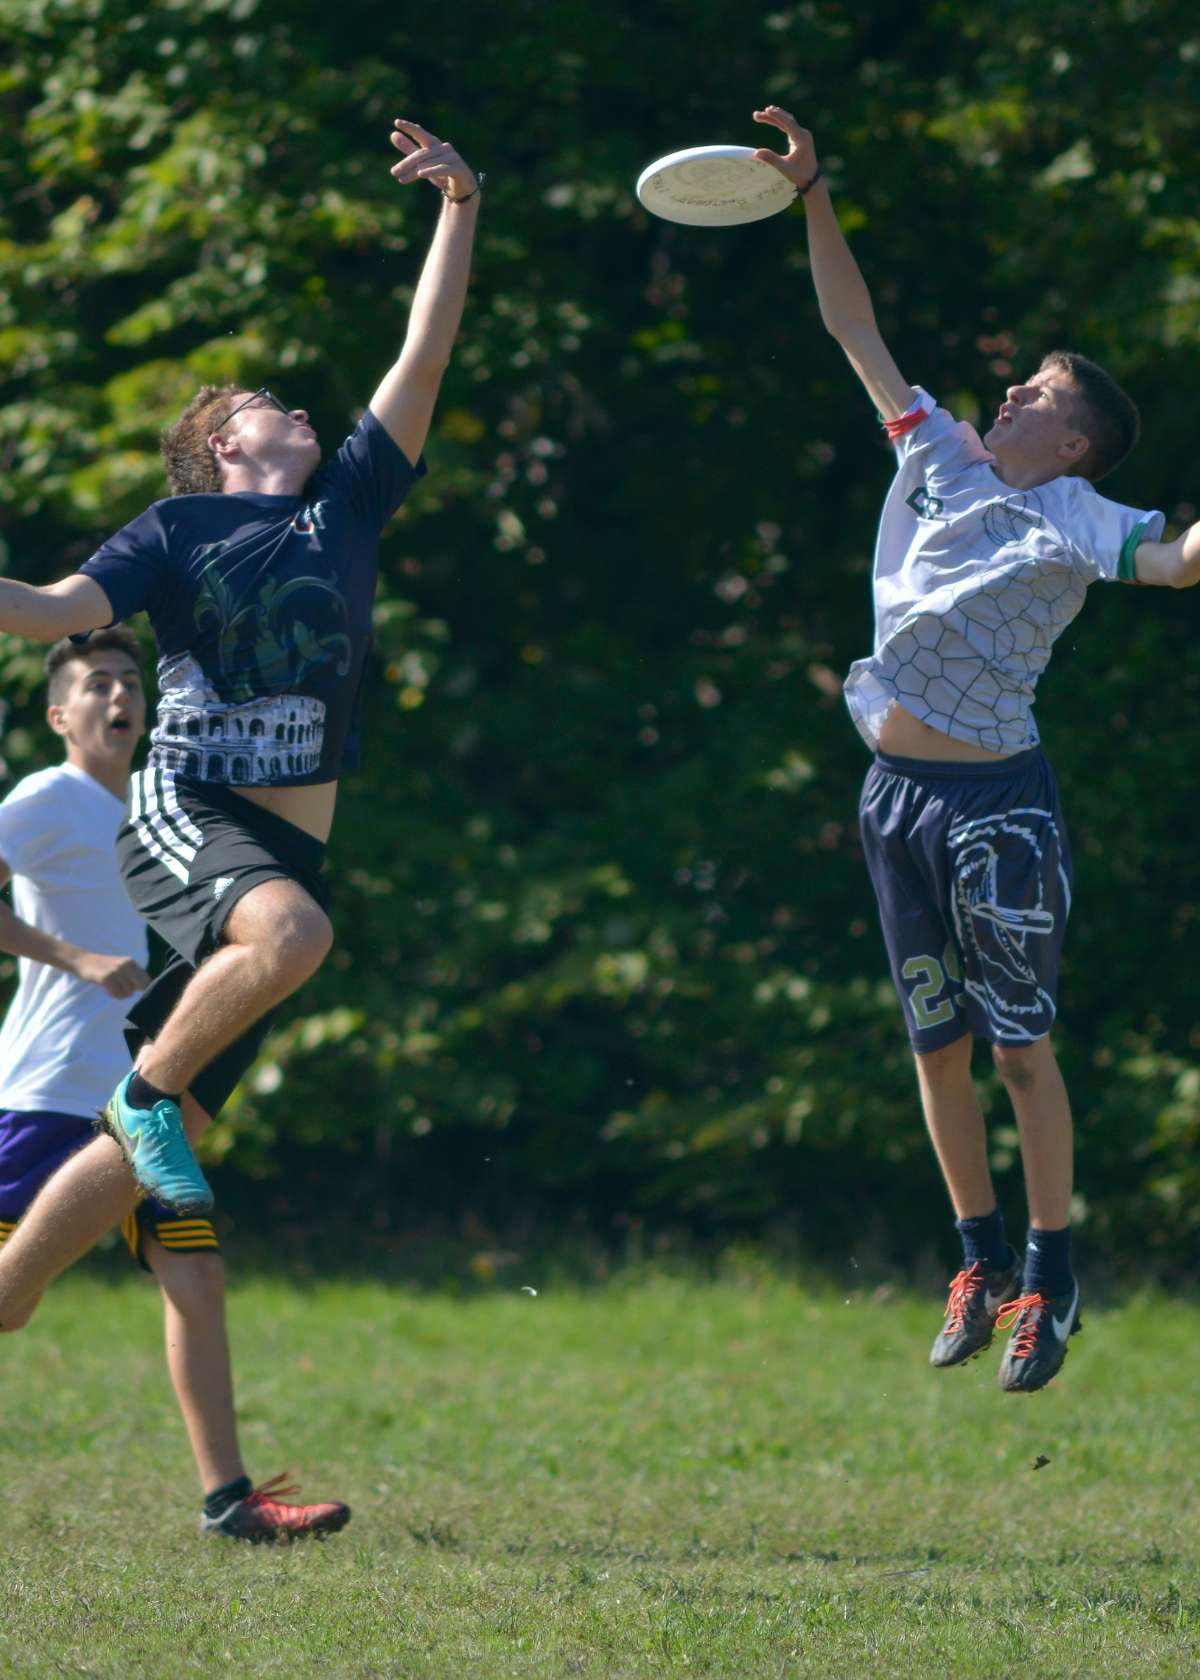 Top 6 Ultimate Frisbee Drills Every Beginner Needs to Know